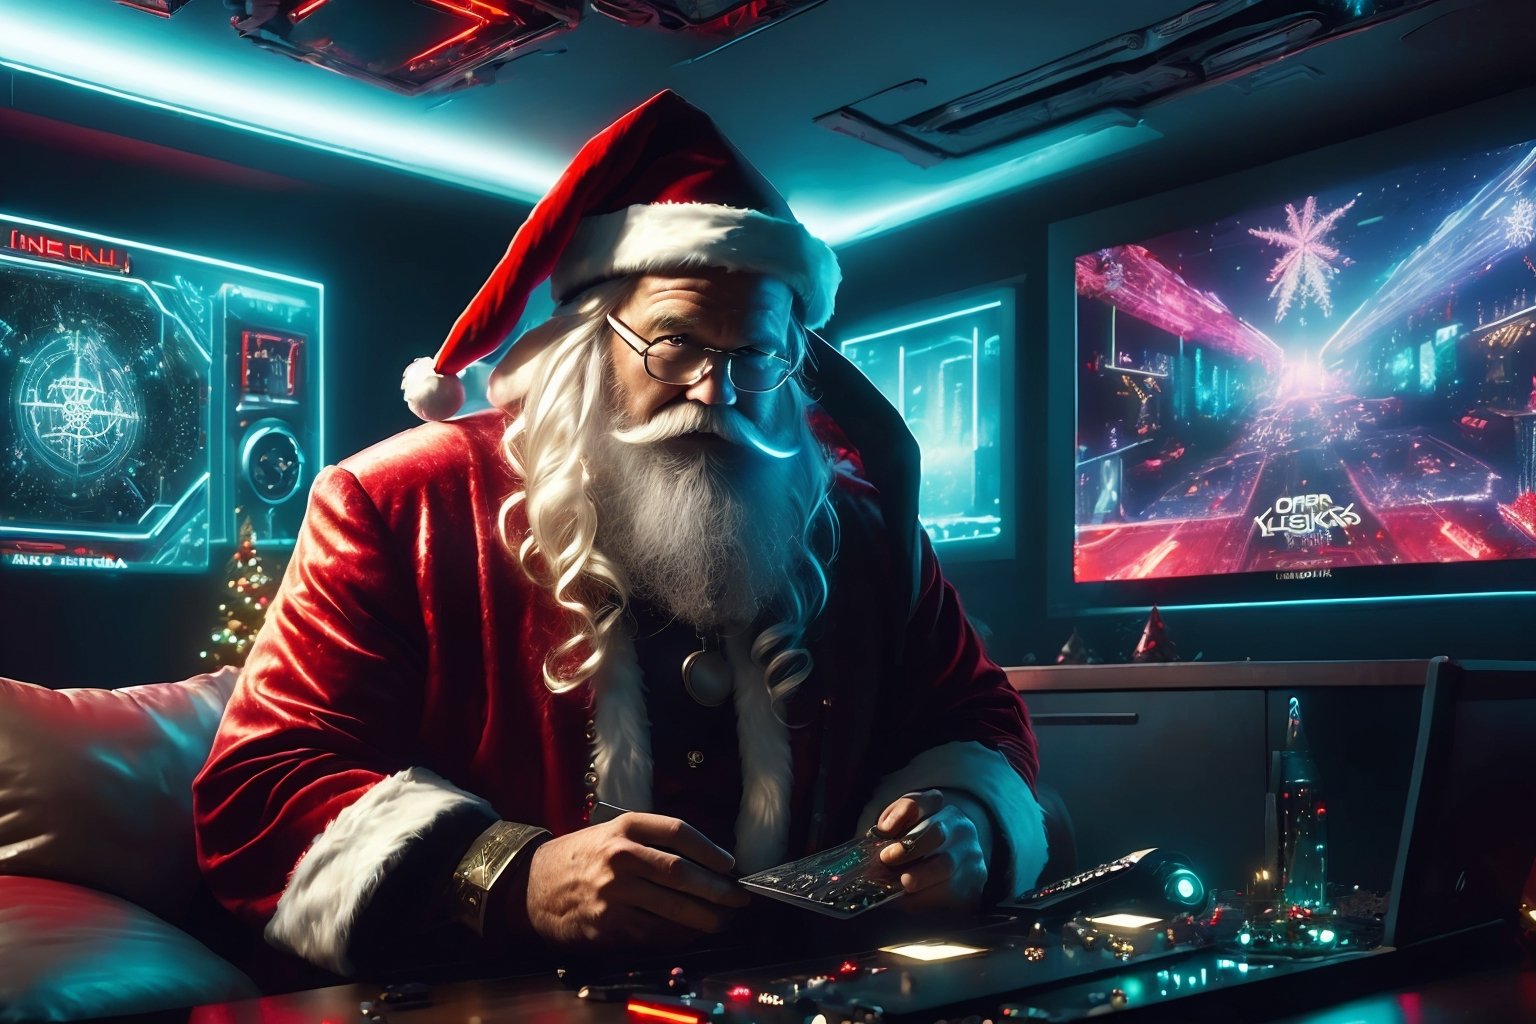 (One Person:1.6), Cyberpunk Santa Claus Sitting in His High-tech House, (Cyberpunk Atmosphere:1.4), (A Christmast Tree and Hall Full of Holographic Monitors Inside his House), Insane Details, Intricate Face Detail, Intricate Hand Details, Cinematic Shot and Lighting, Realistic Colors, Masterpiece, Sharp Focus, Highly Detailed, Taken with DSLR Camera, Realistic Photography, Depth of Field, Incredibly Realistic Environment and Scene, Master Composition and Cinematography, Santa Claus,C7b3rp0nkStyle